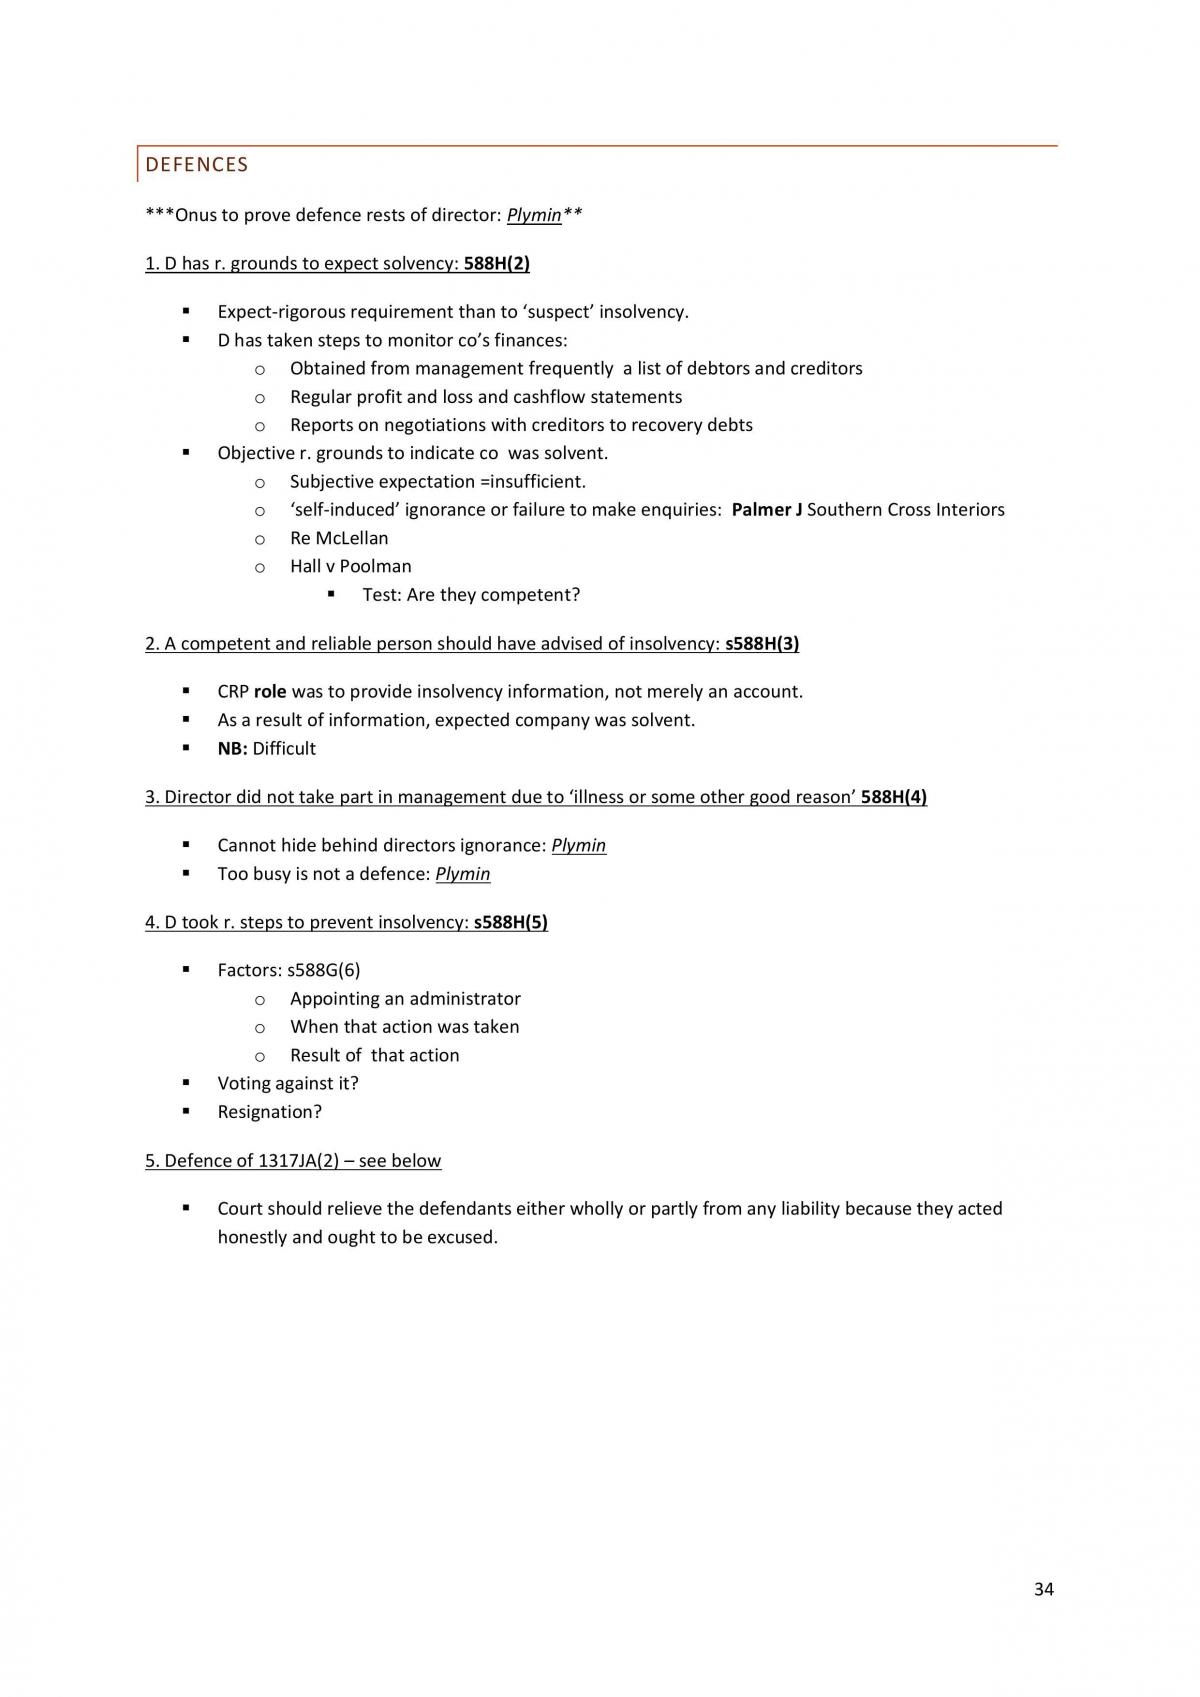 Corporations Law Exam Notes - Page 34